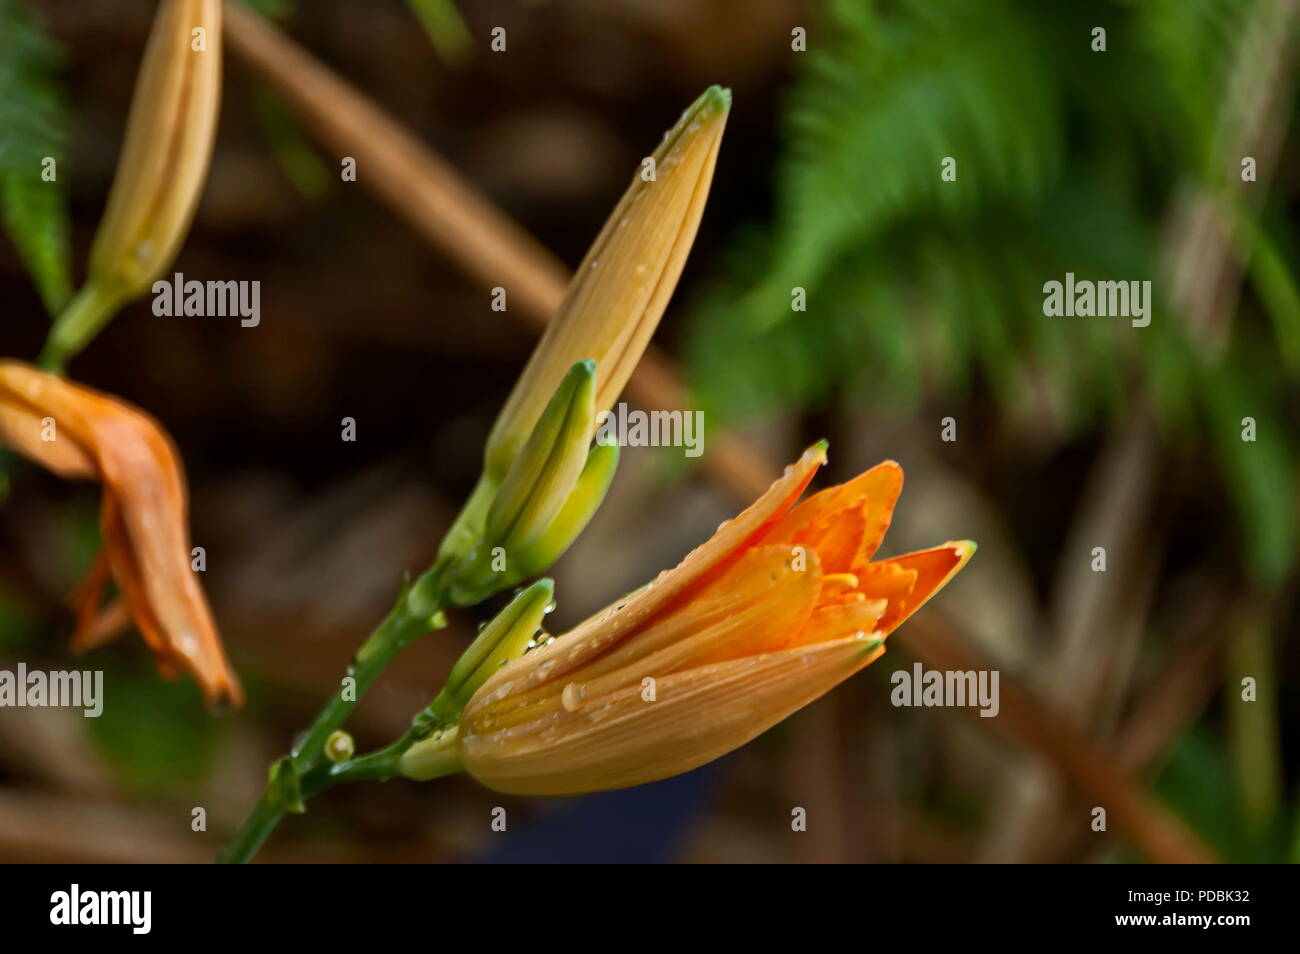 Morning wet flowers with drops after rainy night in Sabie, South Africa Stock Photo